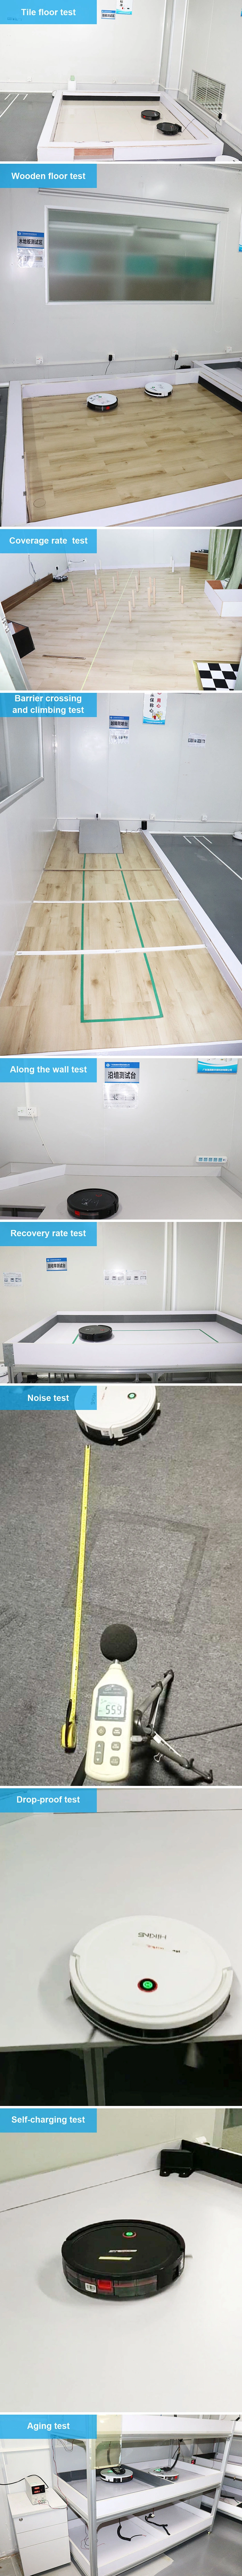 Wholesale Smart Robotic Cleaner Mobile Control Vacuum High-Suction Sweeper Hks-888